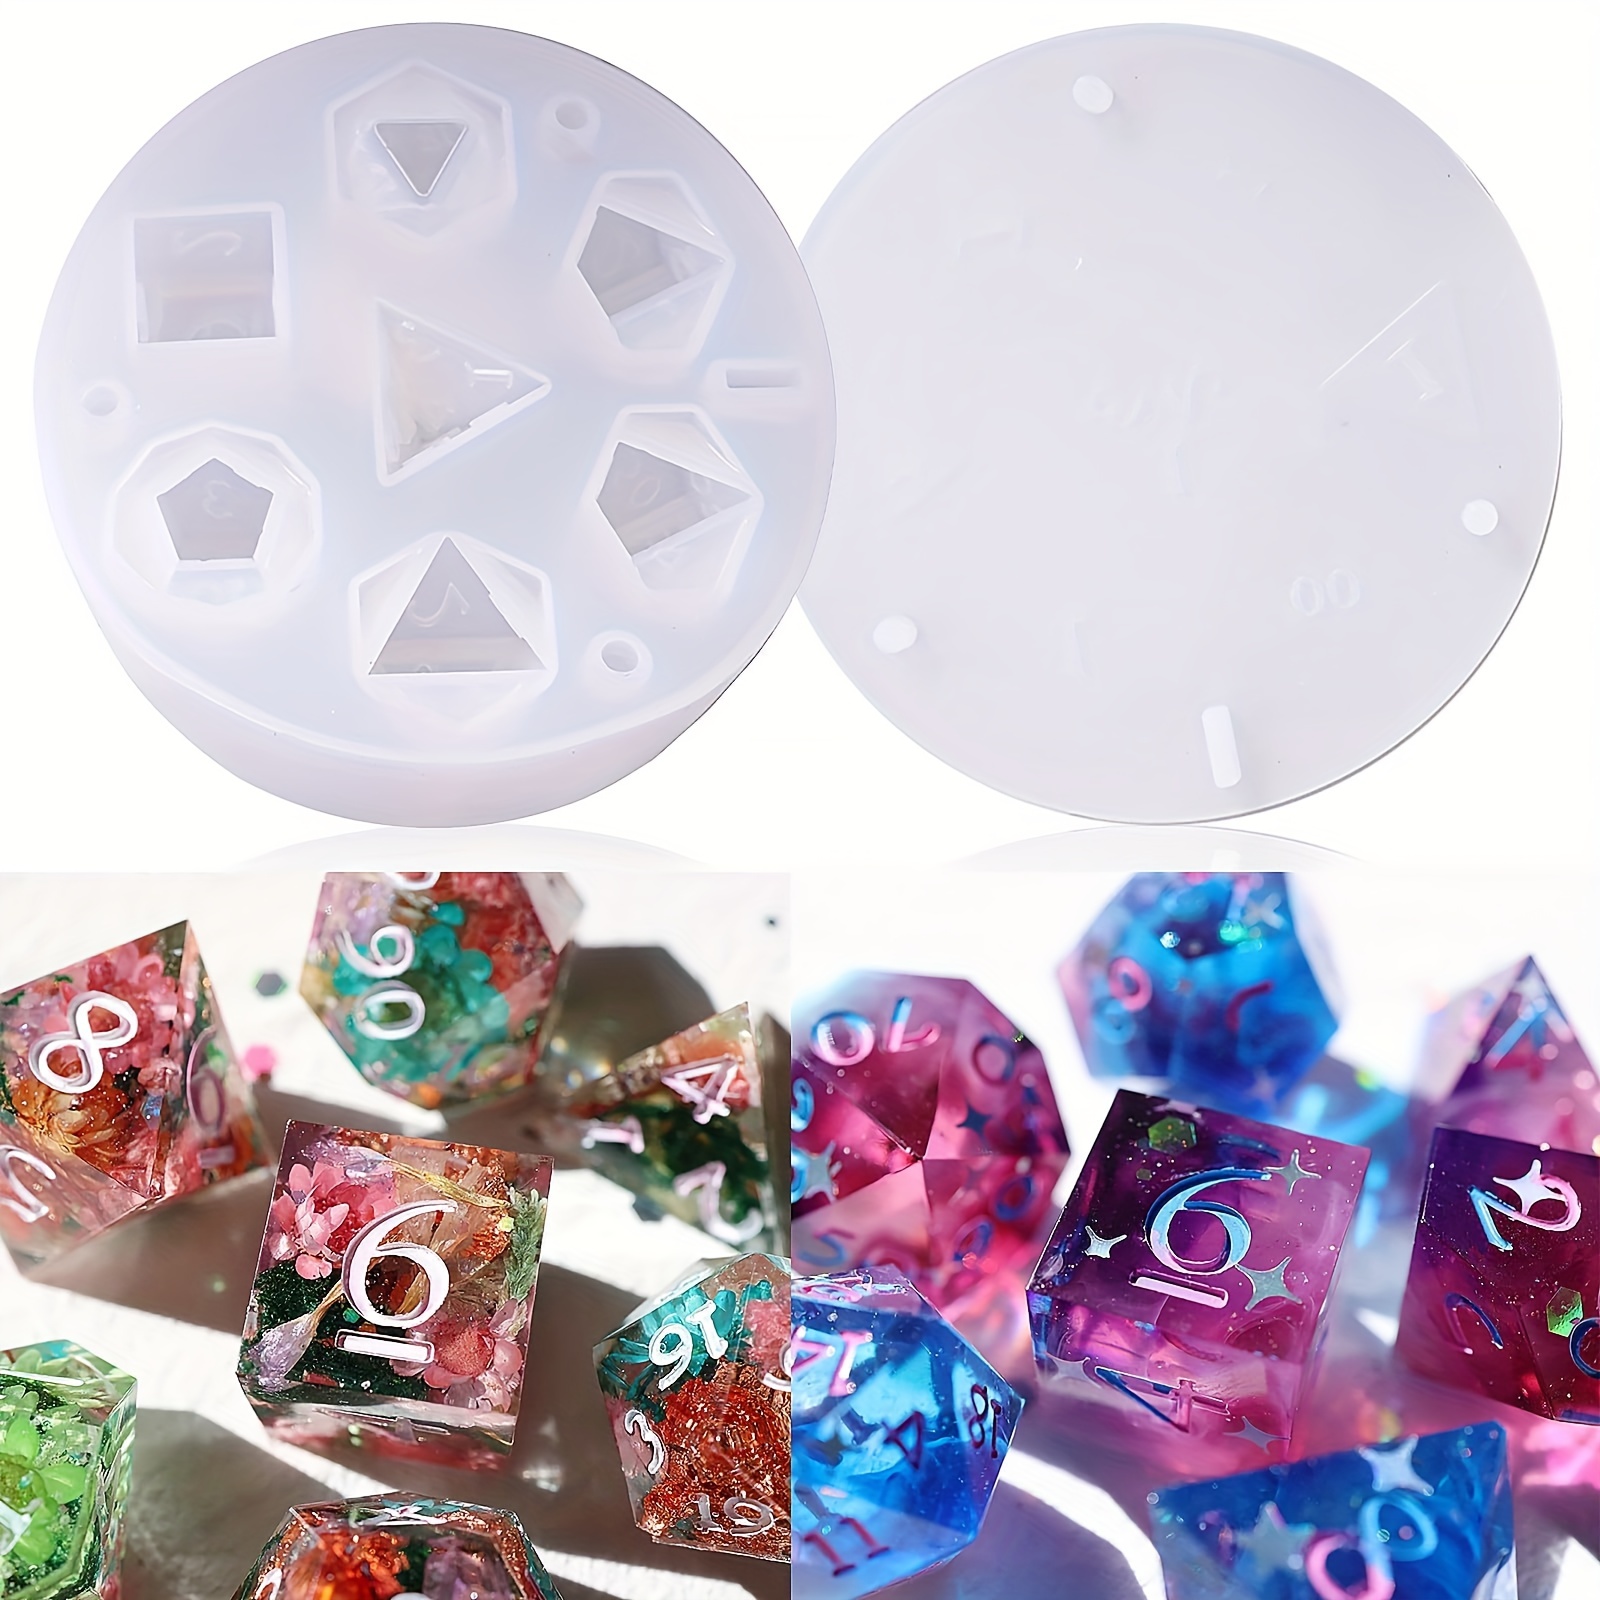 Dice Molds For Resin Silicone D20 Dice Molds For Resin Work Polyhedral Game  Dice Molds For Epoxy Resin Dice Making 3D Silicone - AliExpress